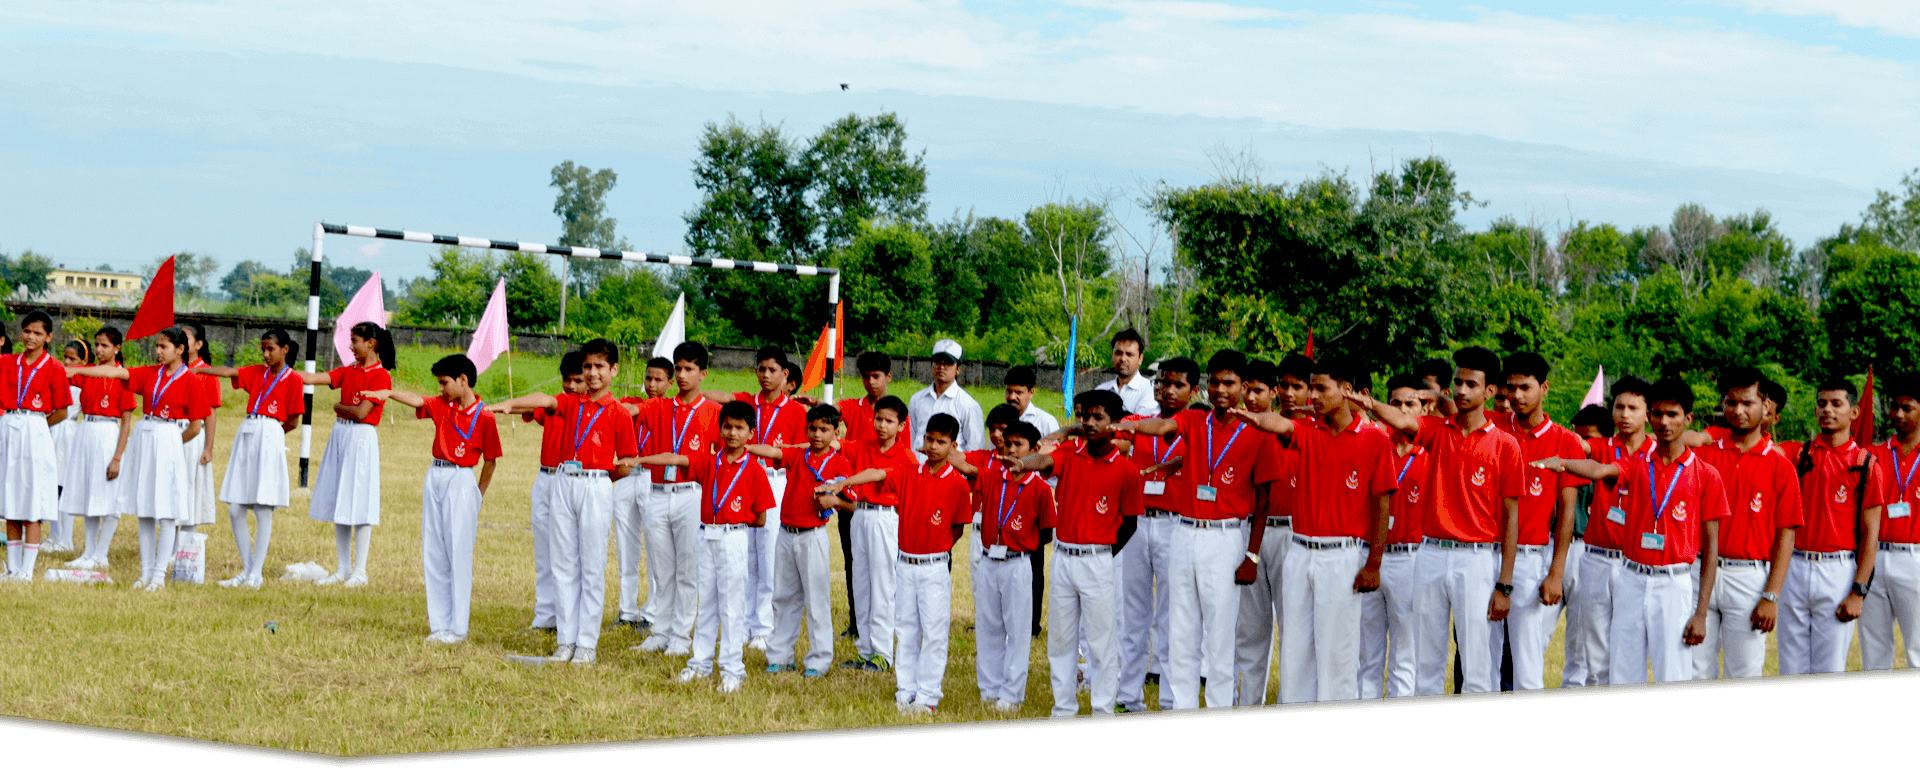 Little Flower School Maharajganj Fee Structure And Admission Process Joon Square